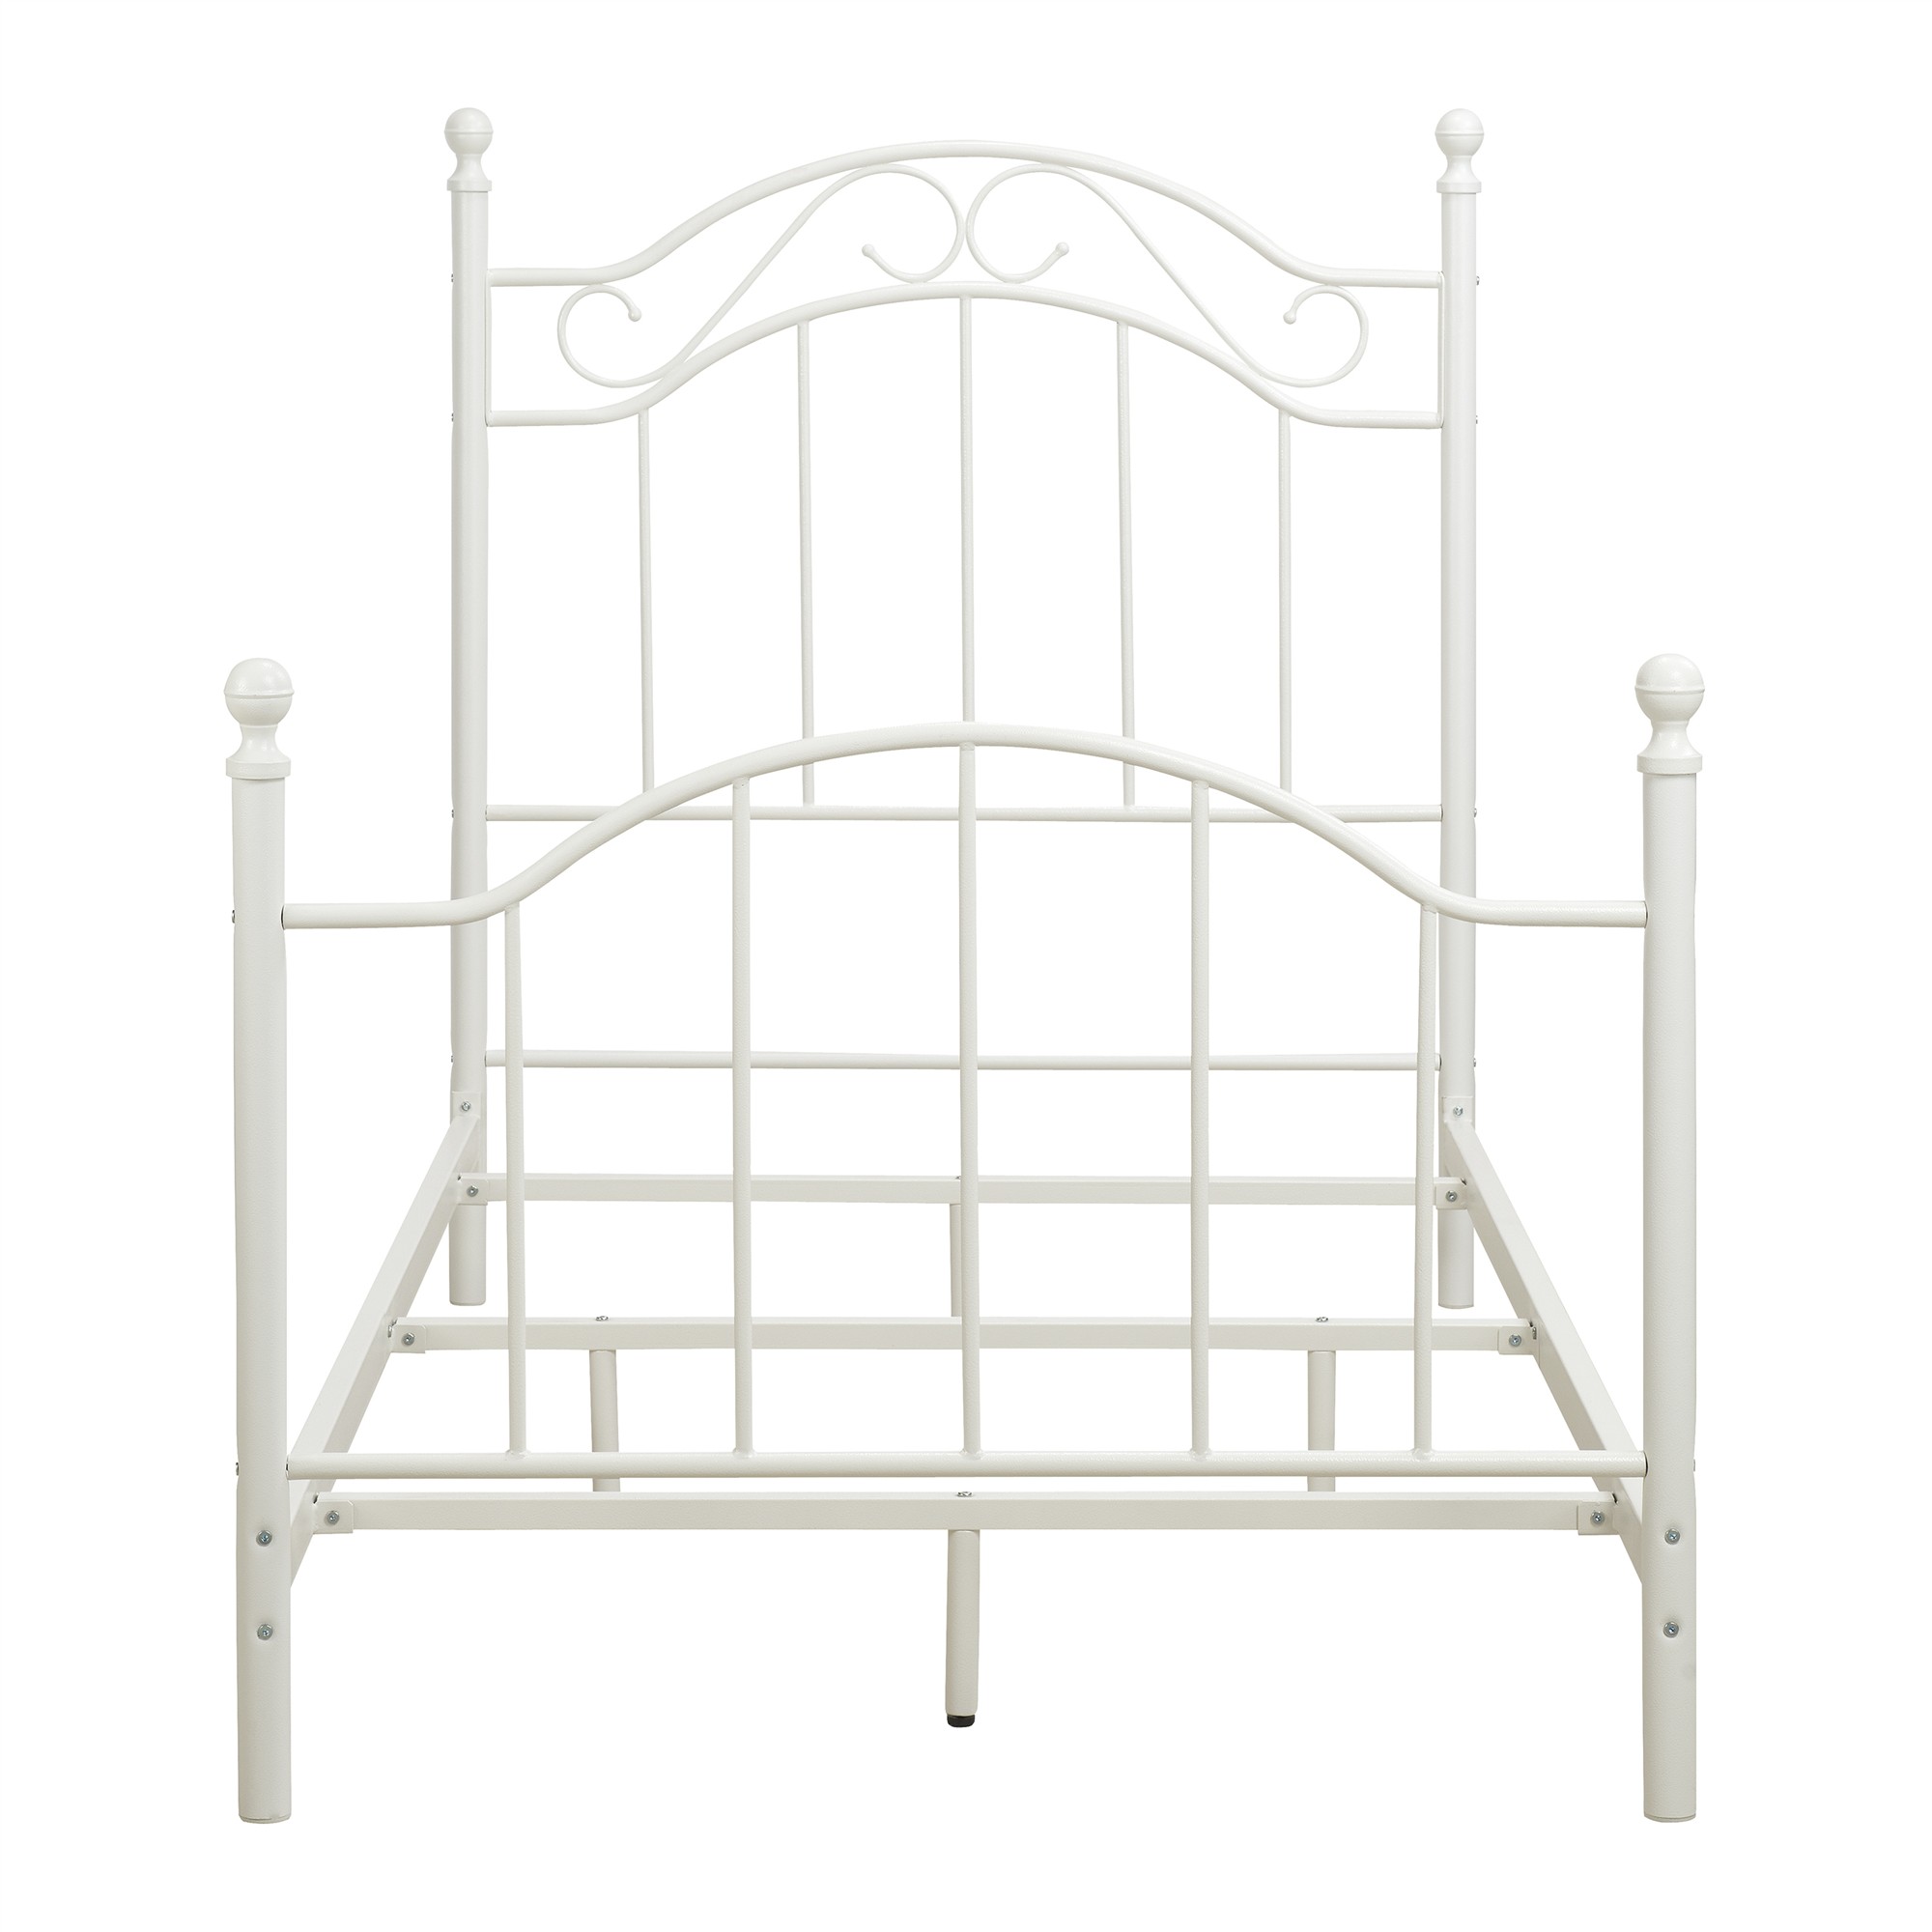 Mainstays Metal Bed, Bedroom Furniture, Twin Size Frame, White - image 4 of 16